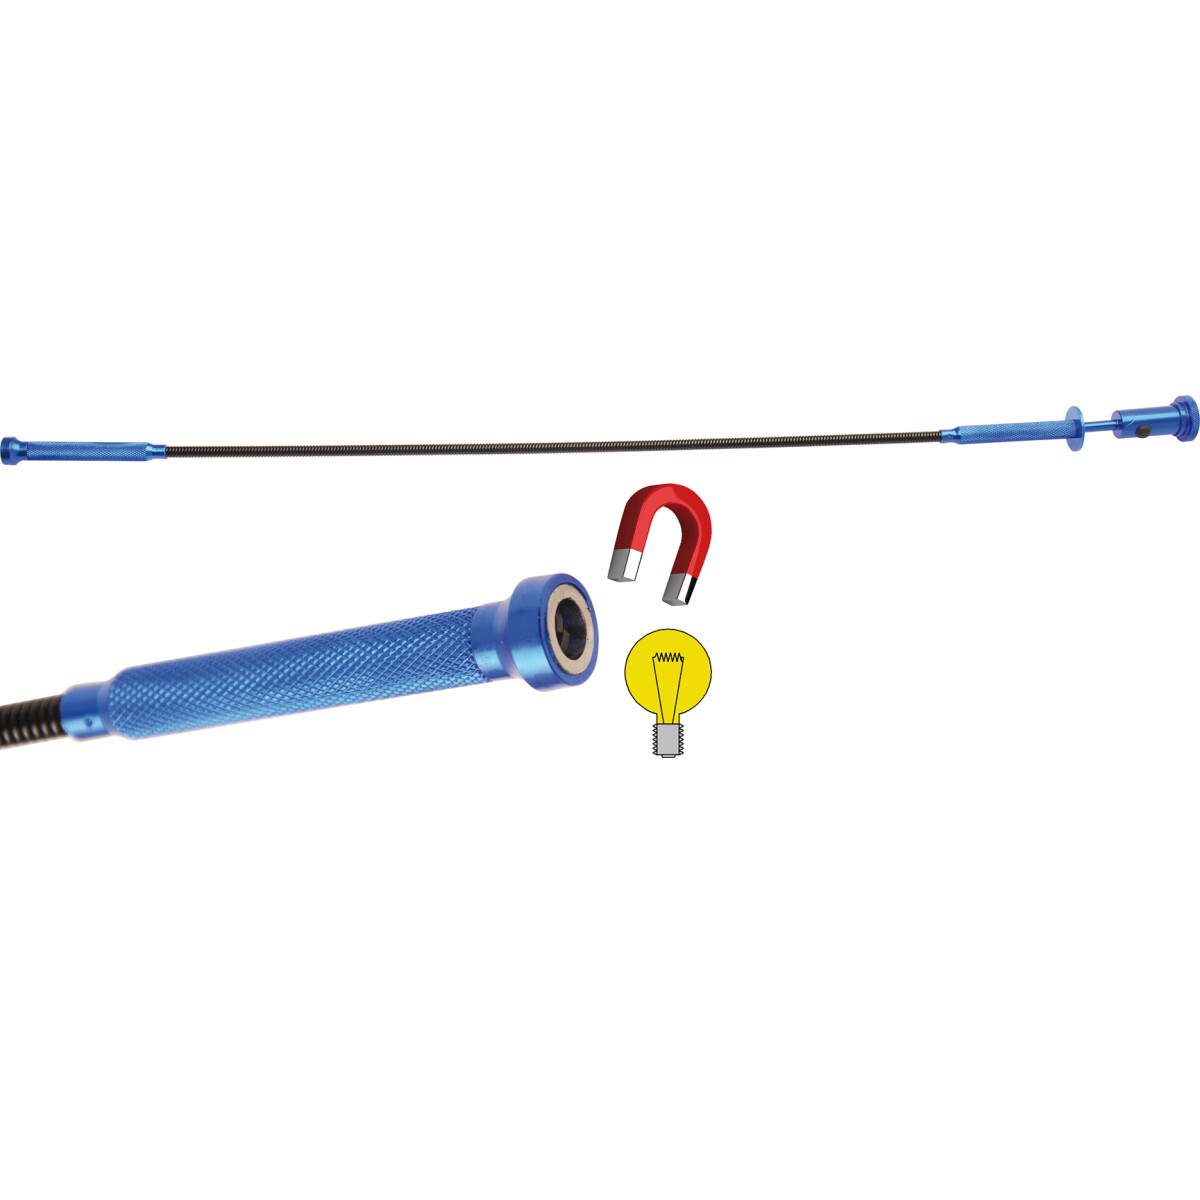 BGS Claw / Magnetic Lifter / Combination Light Tool | 615...